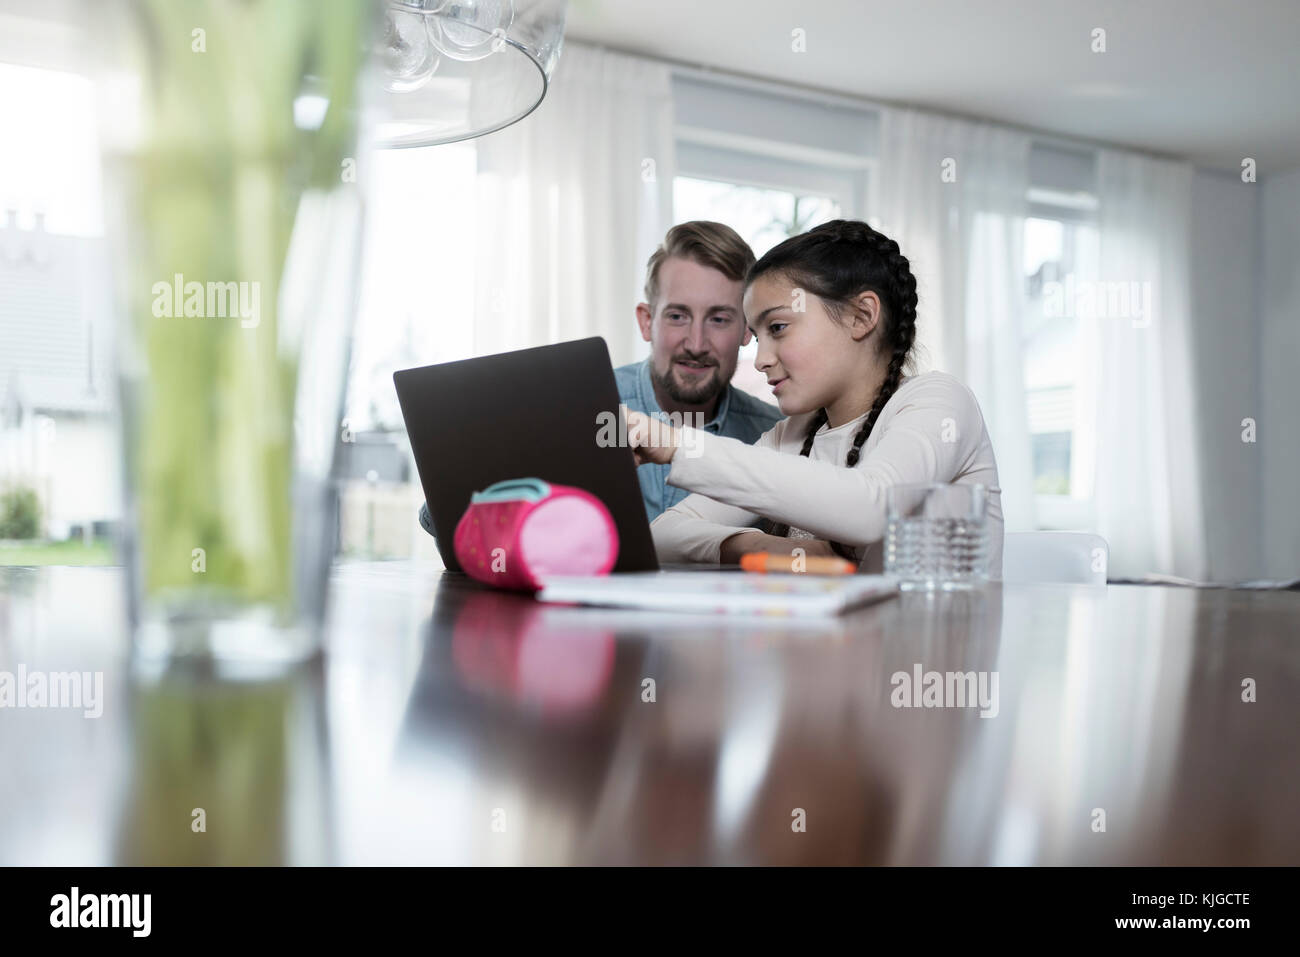 Father and daughter looking at laptop together Stock Photo